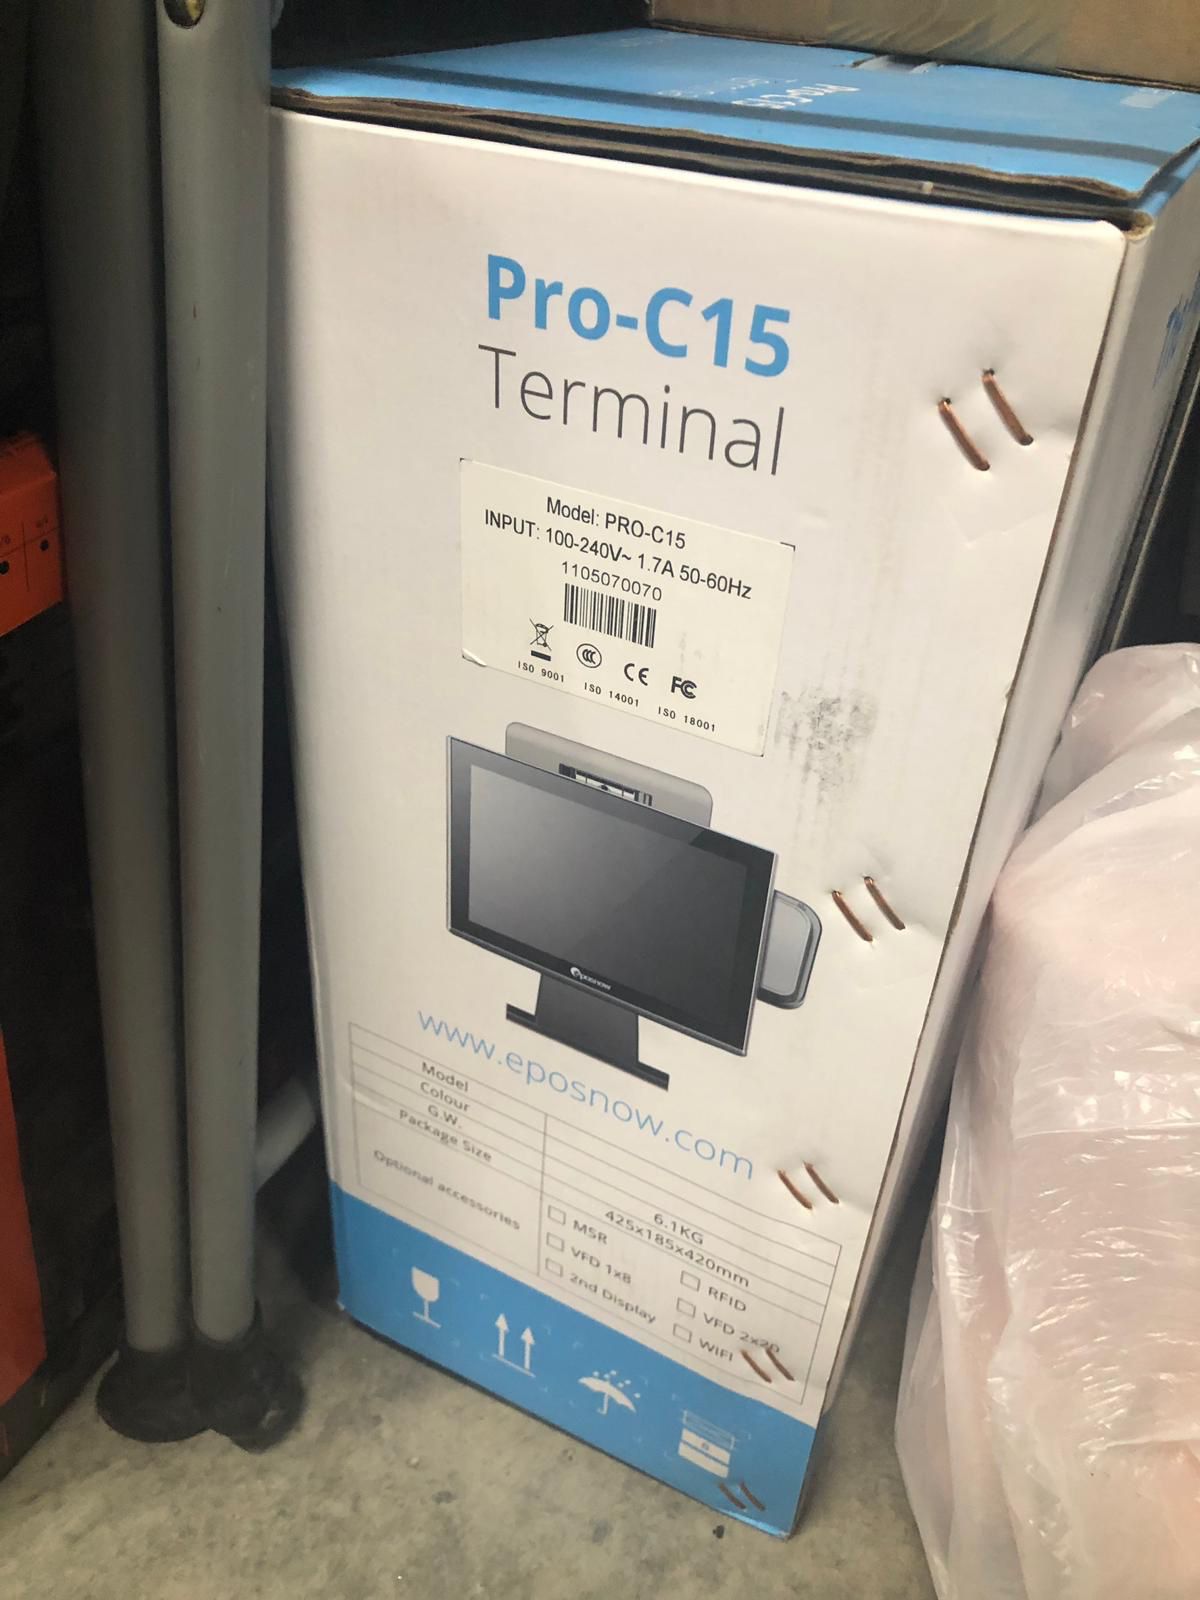 EPOSNOW RETAIL COMPLETE RETAILS SYSTEMS (TOUCH SCREEN MONITORS, CREDIT/DEBIT CARD READERS, BARCODE READERS, CASH REGISTERS, RECEIPT PRINTERS)